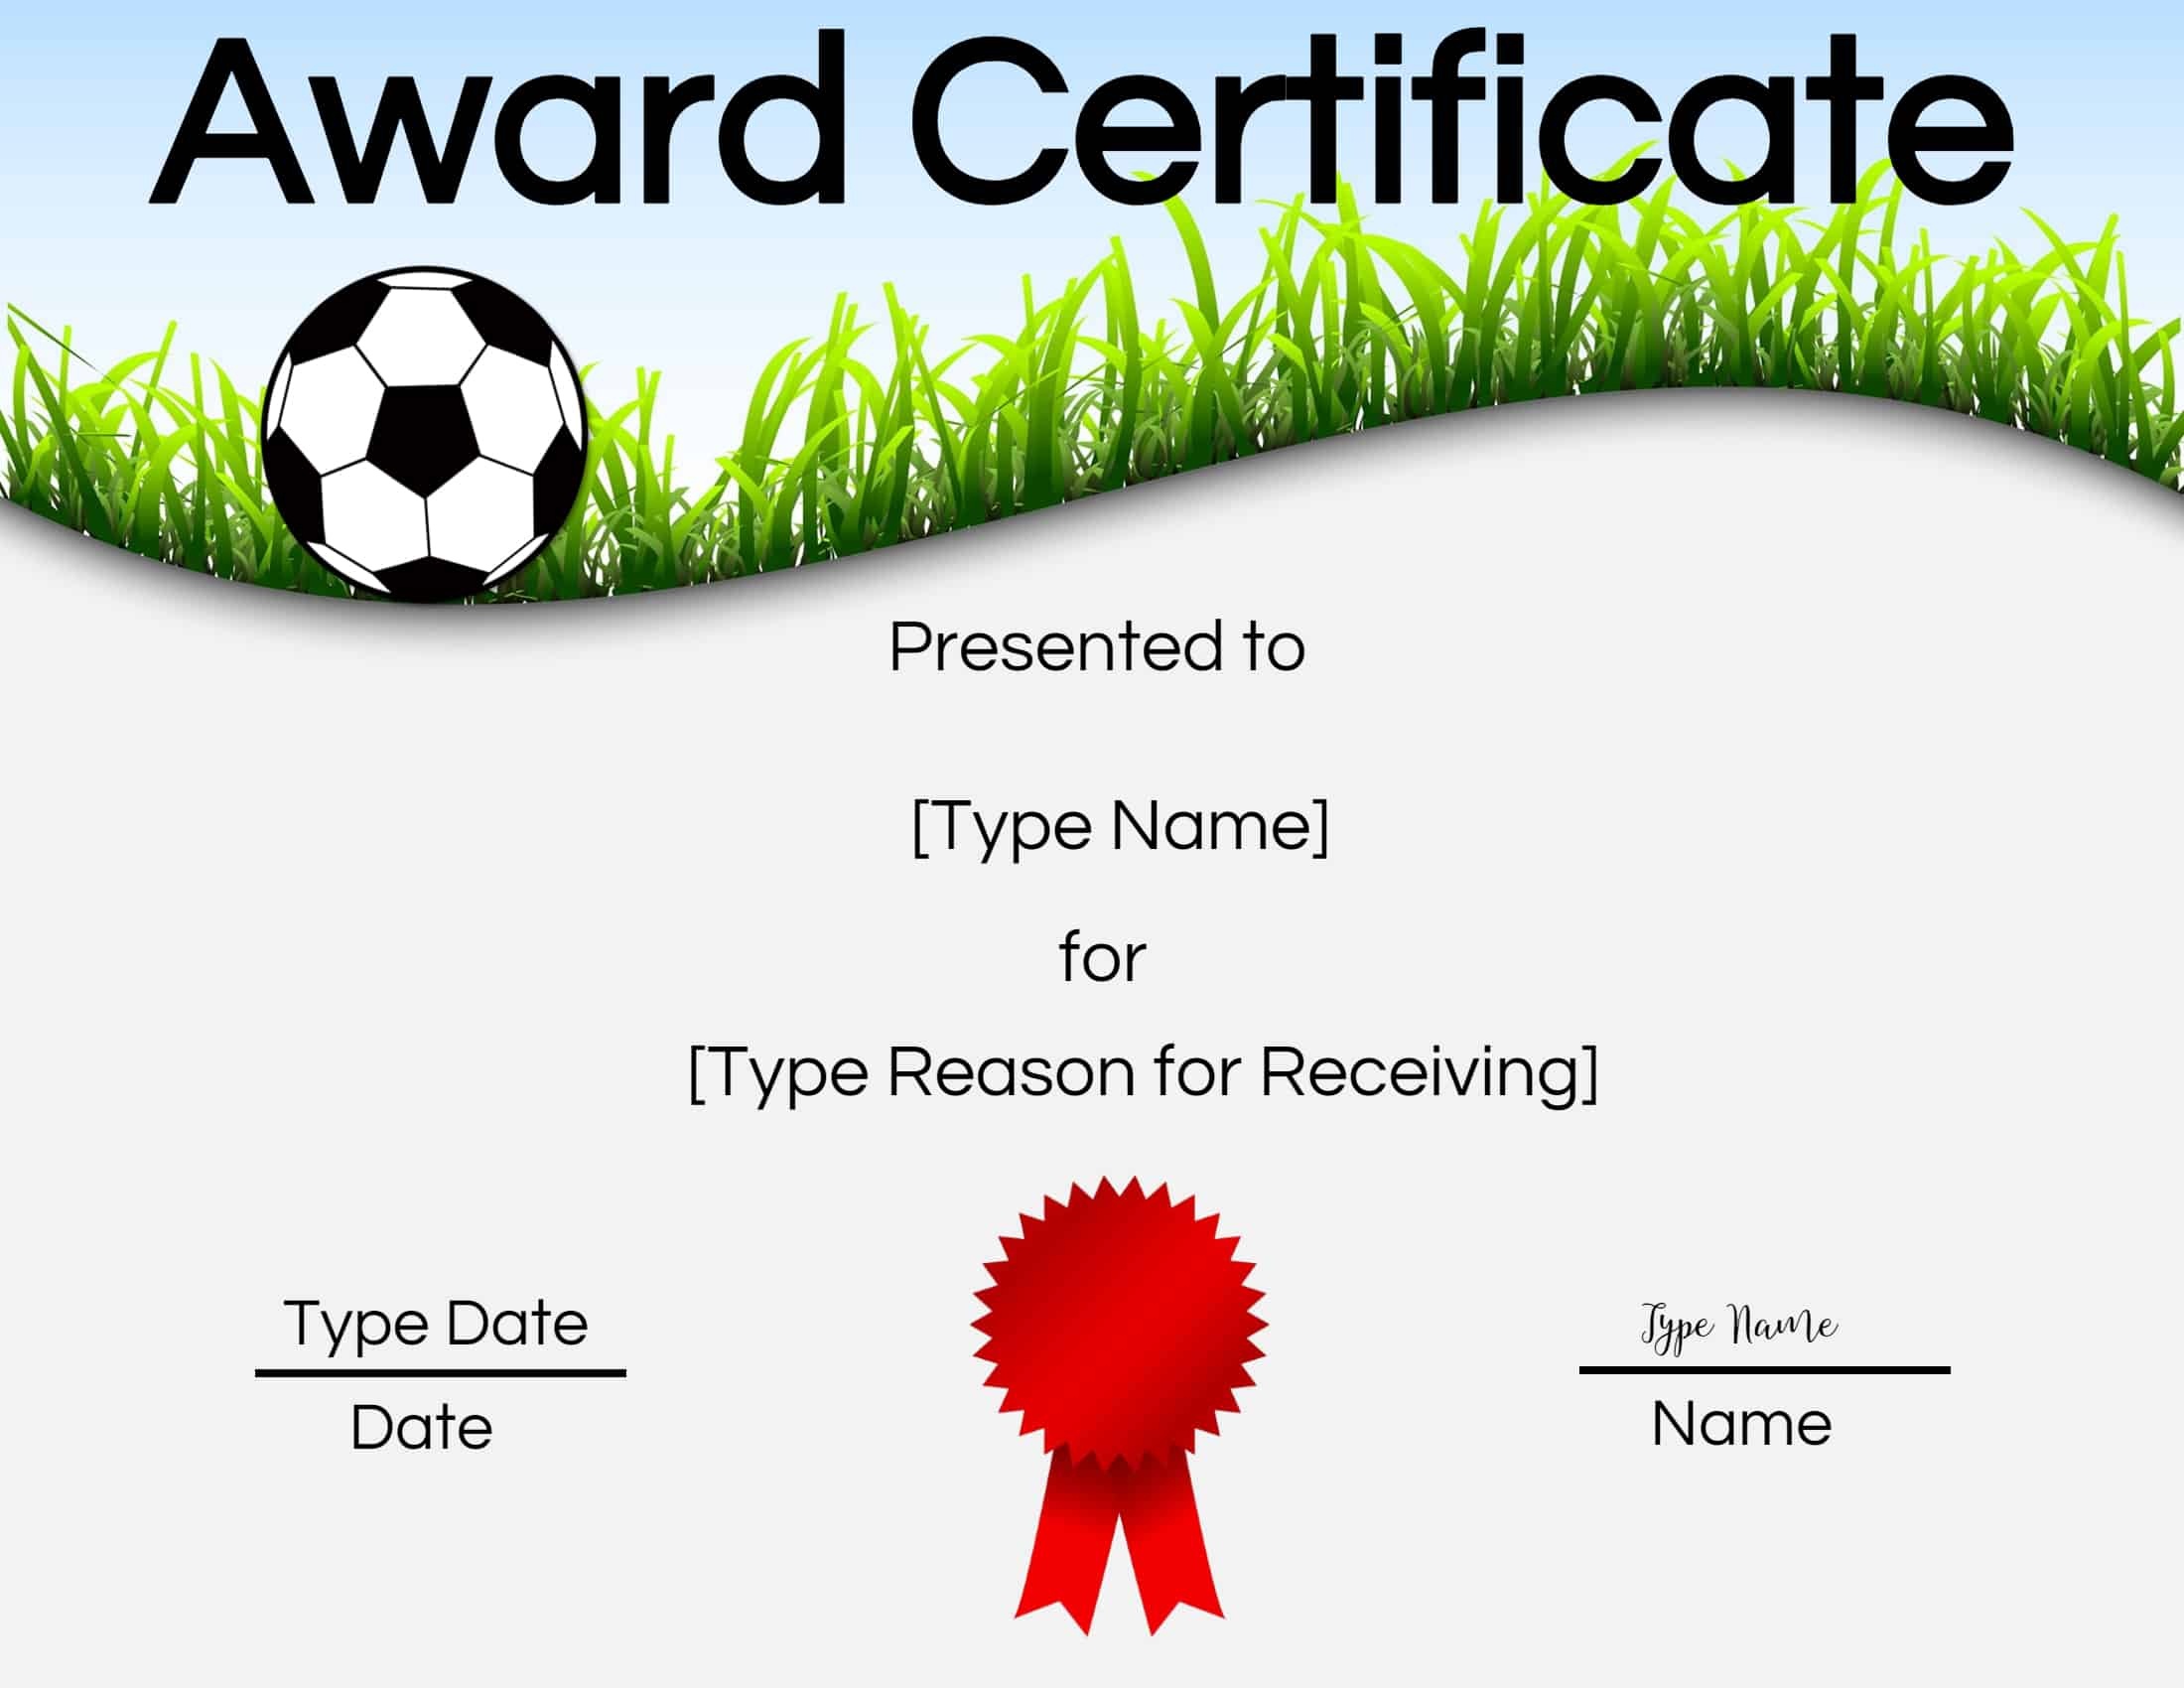 Free Soccer Certificate Maker | Edit Online And Print At Home - Free Soccer Award Certificates Printable